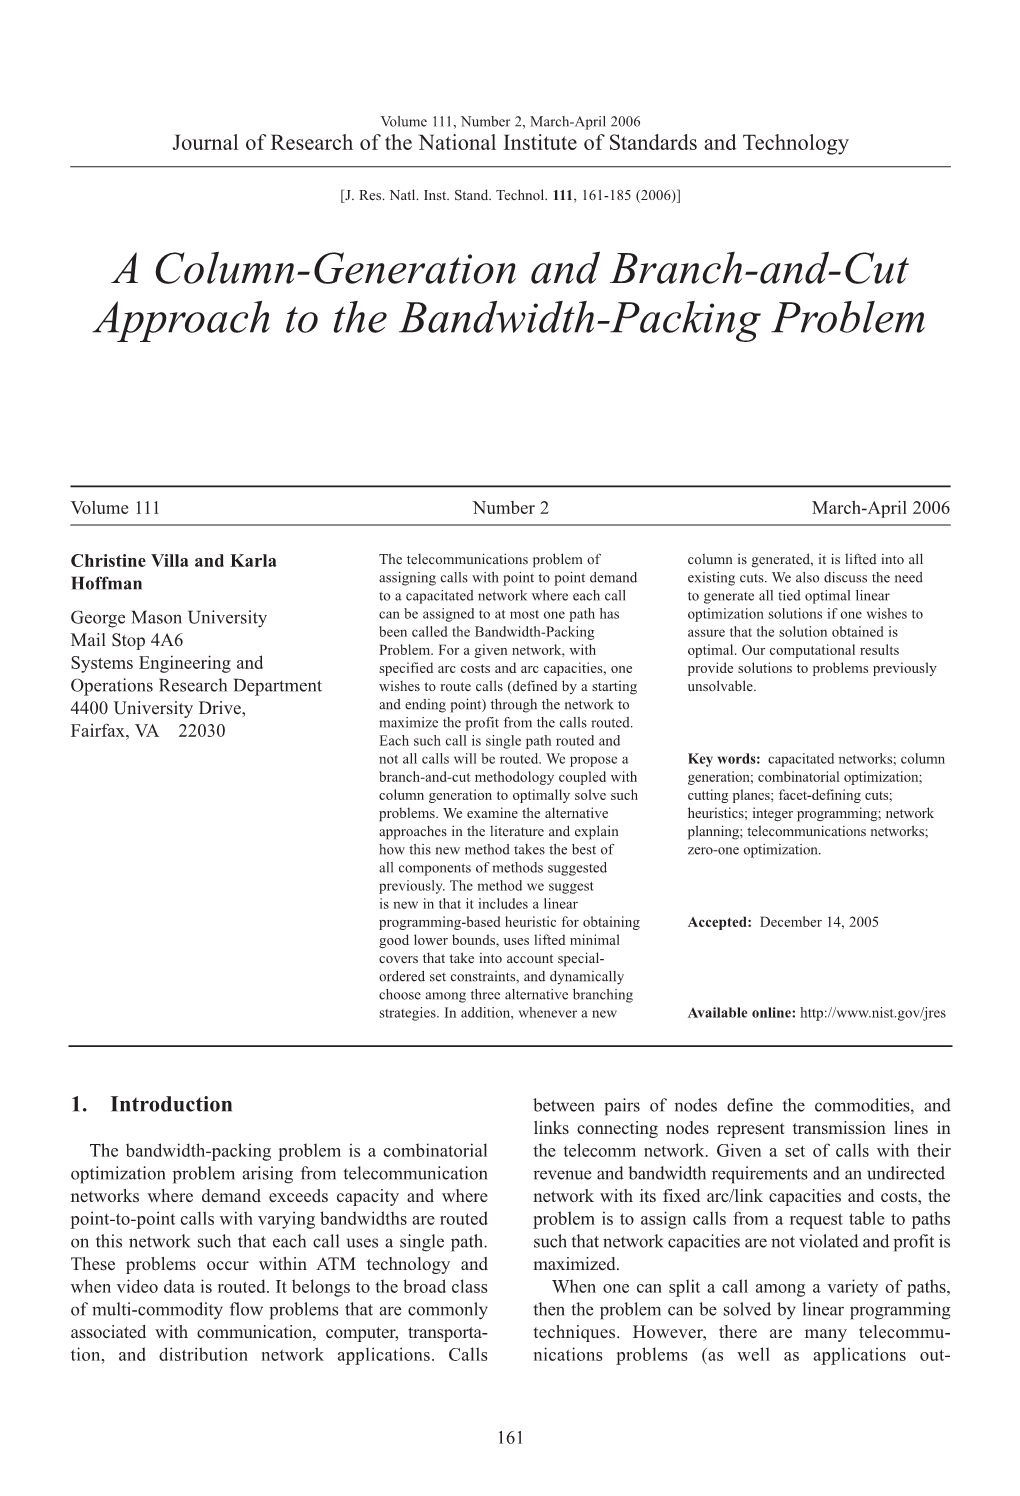 A Column-Generation and Branch-And-Cut Approach to the Bandwidth-Packing Problem